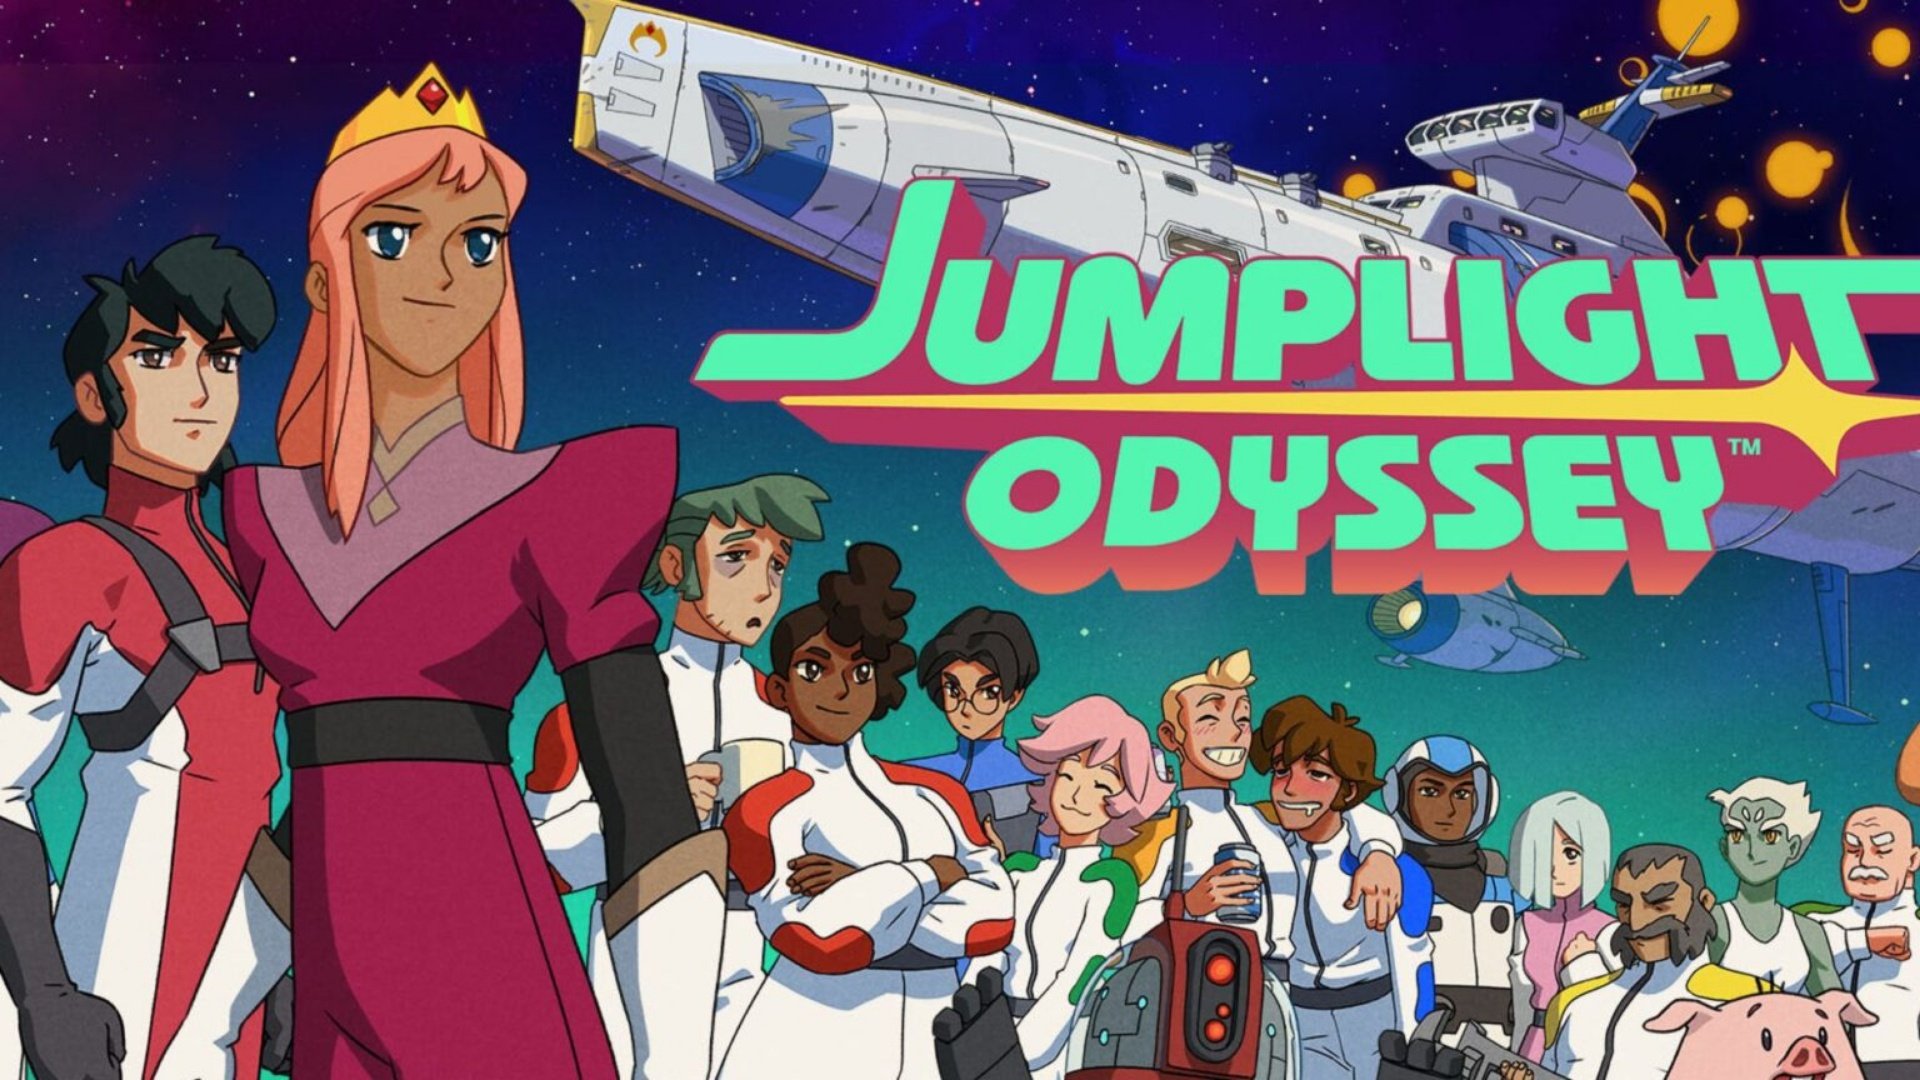 image is a poster of Jumplight Odyssey game showing game characters